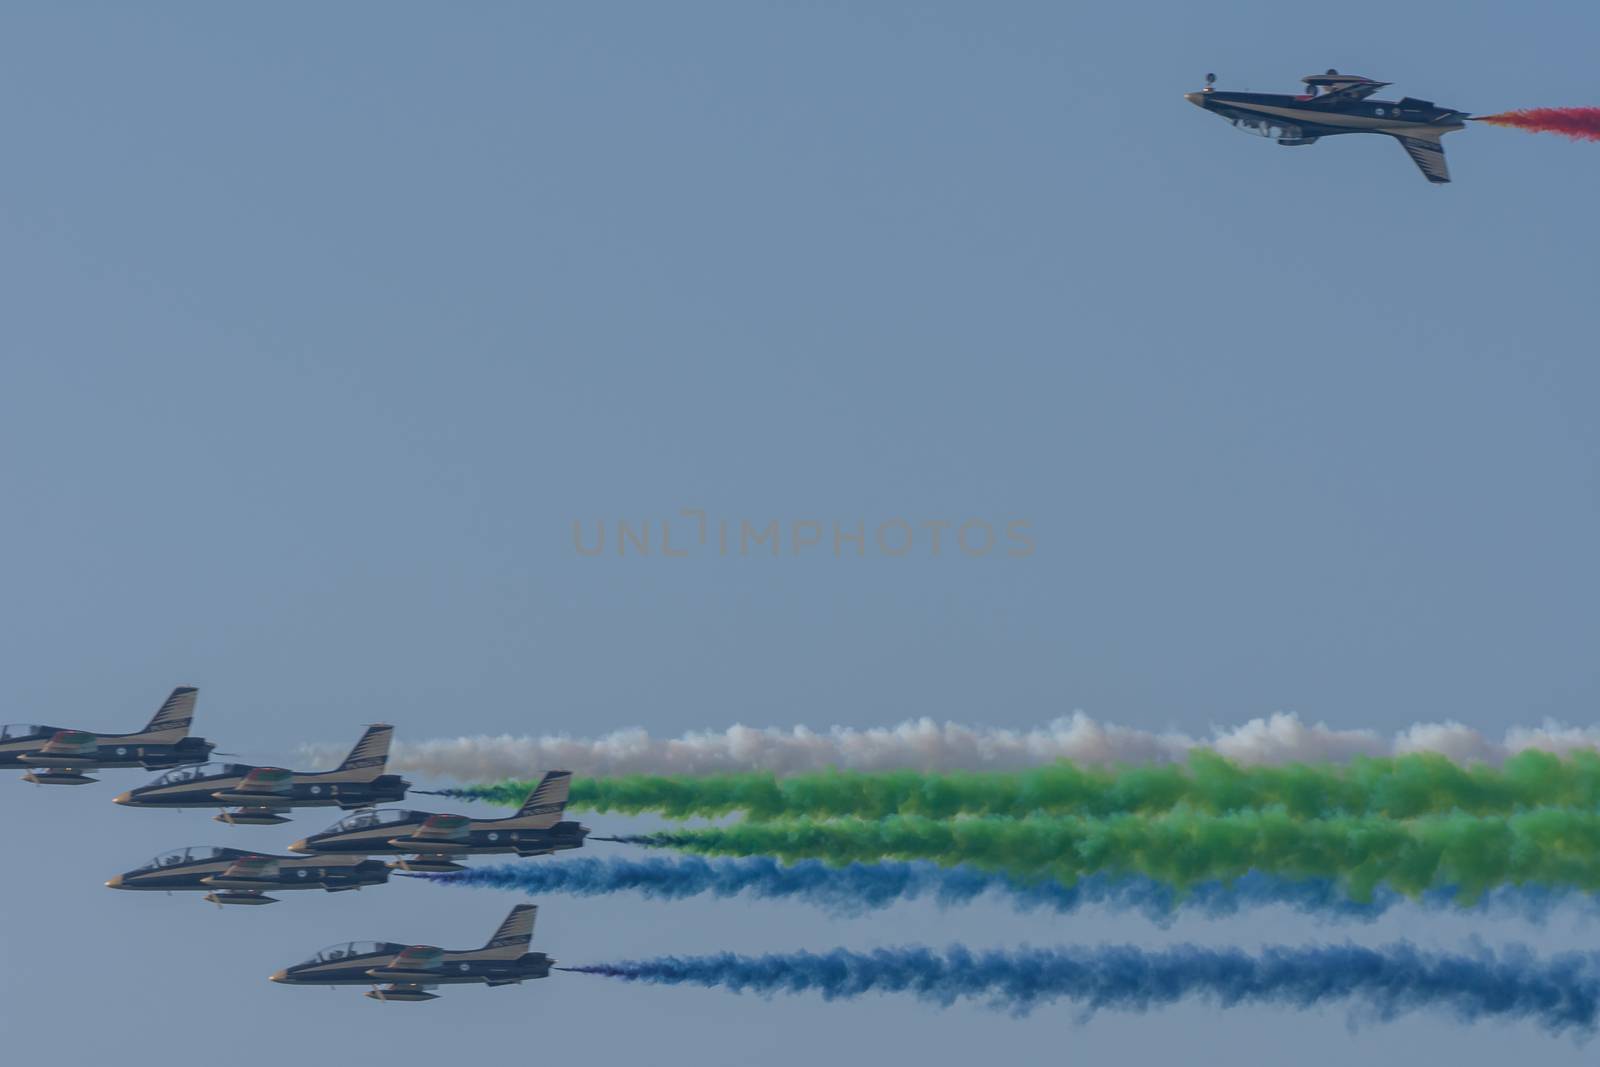 UAE Largest Military Union Fortress 7 Show in Umm al Quwain with coordinated military aircrafts showing the UAE flag colors on the bright blue sky